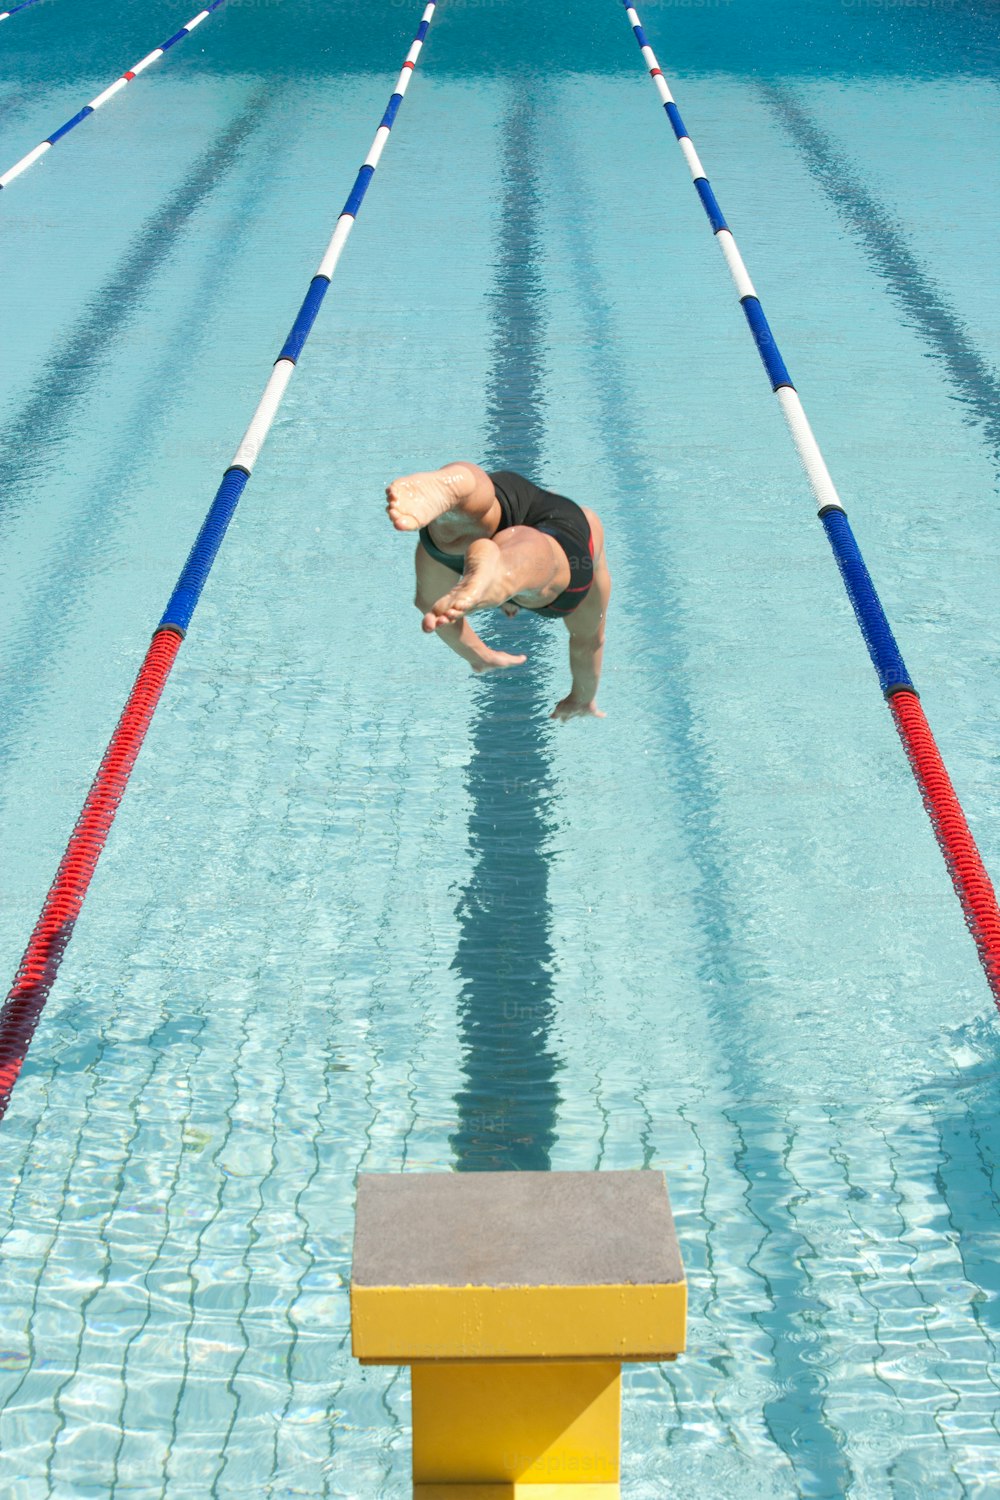 a man diving into a swimming pool